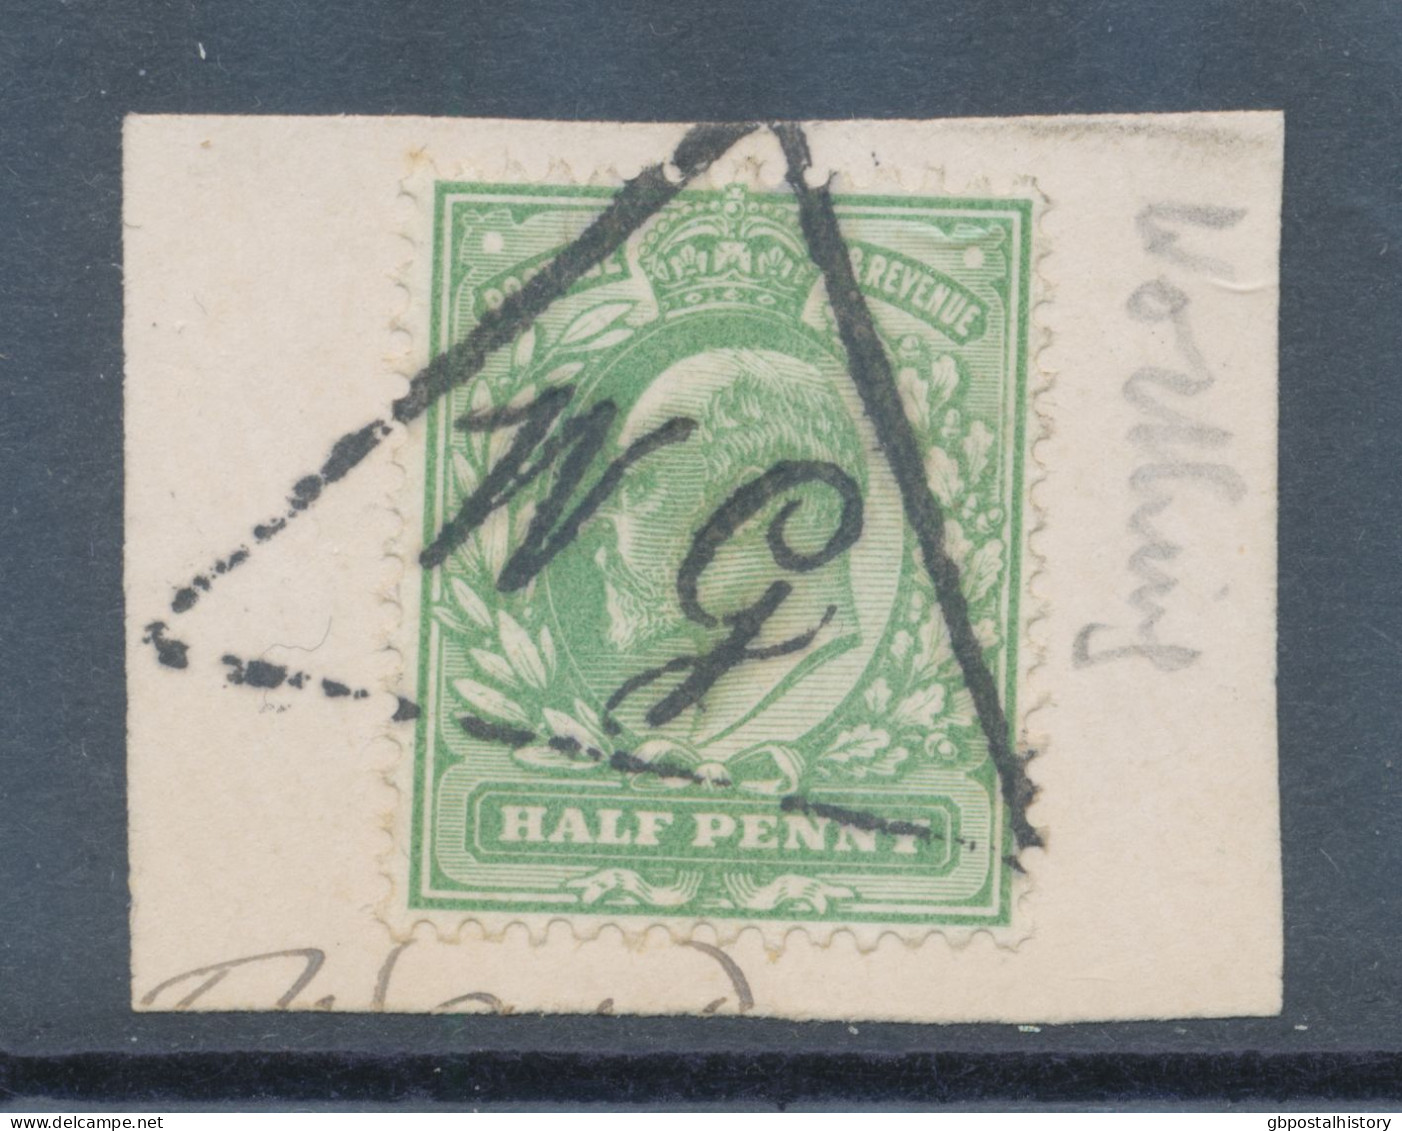 GB TRIANGULAR POSTMARK „WG“ (Worthing) On EVII ½d Superb Used Piece, Triangulars In Script Characters Are Very Scarce - Used Stamps